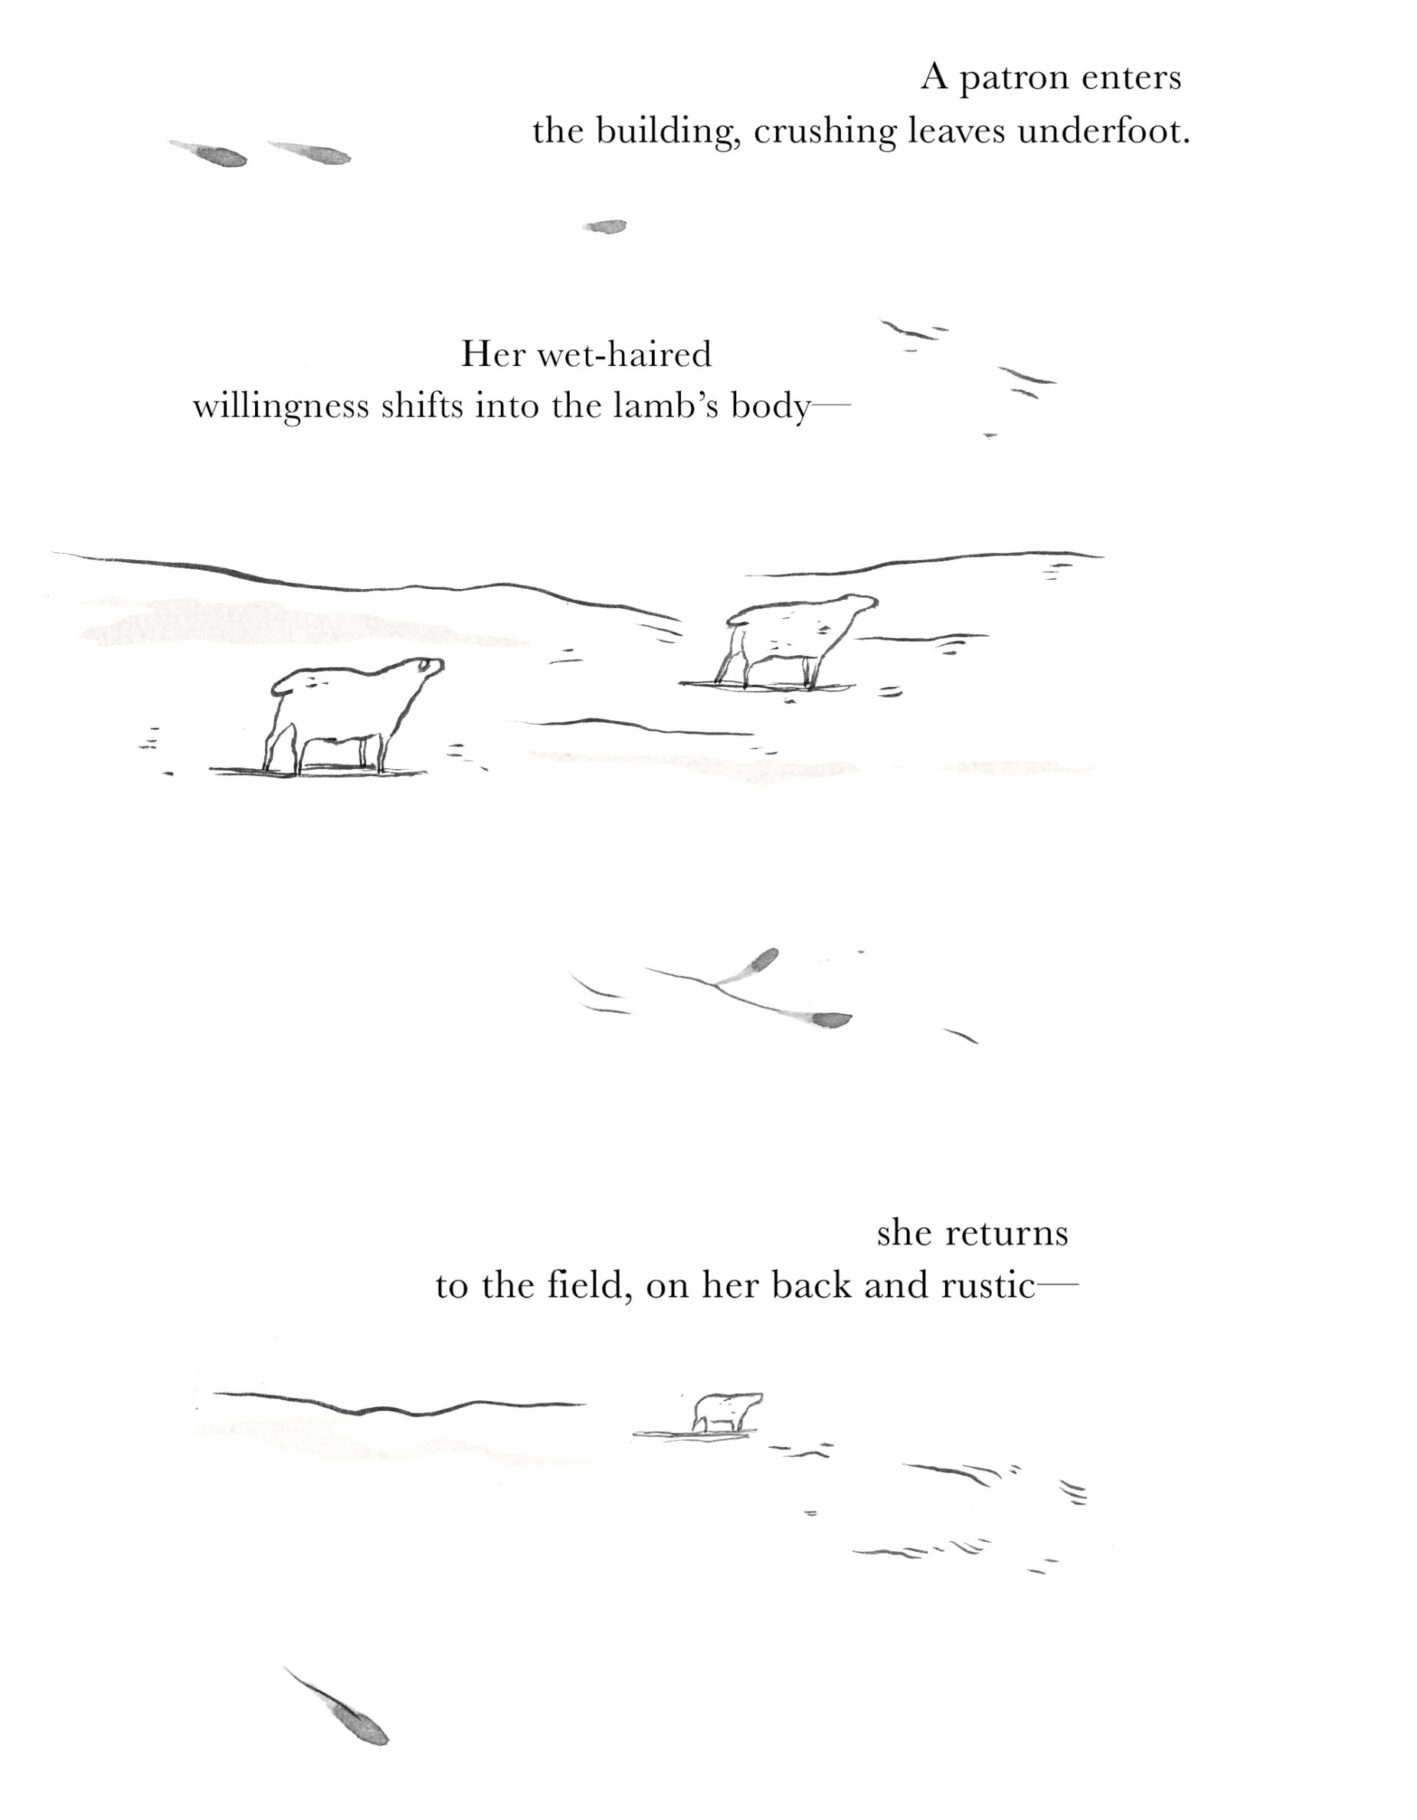 The sheep are even smaller, two of them appearing to have stilled. The following image shows a singular sheep, stopped far in the distance. Text reads: A patron enters / the building, crushing leaves underfoot. / Her wet-haired / willingness shifts into the lamb's body— / she returns / to the field, on her back and rustic—